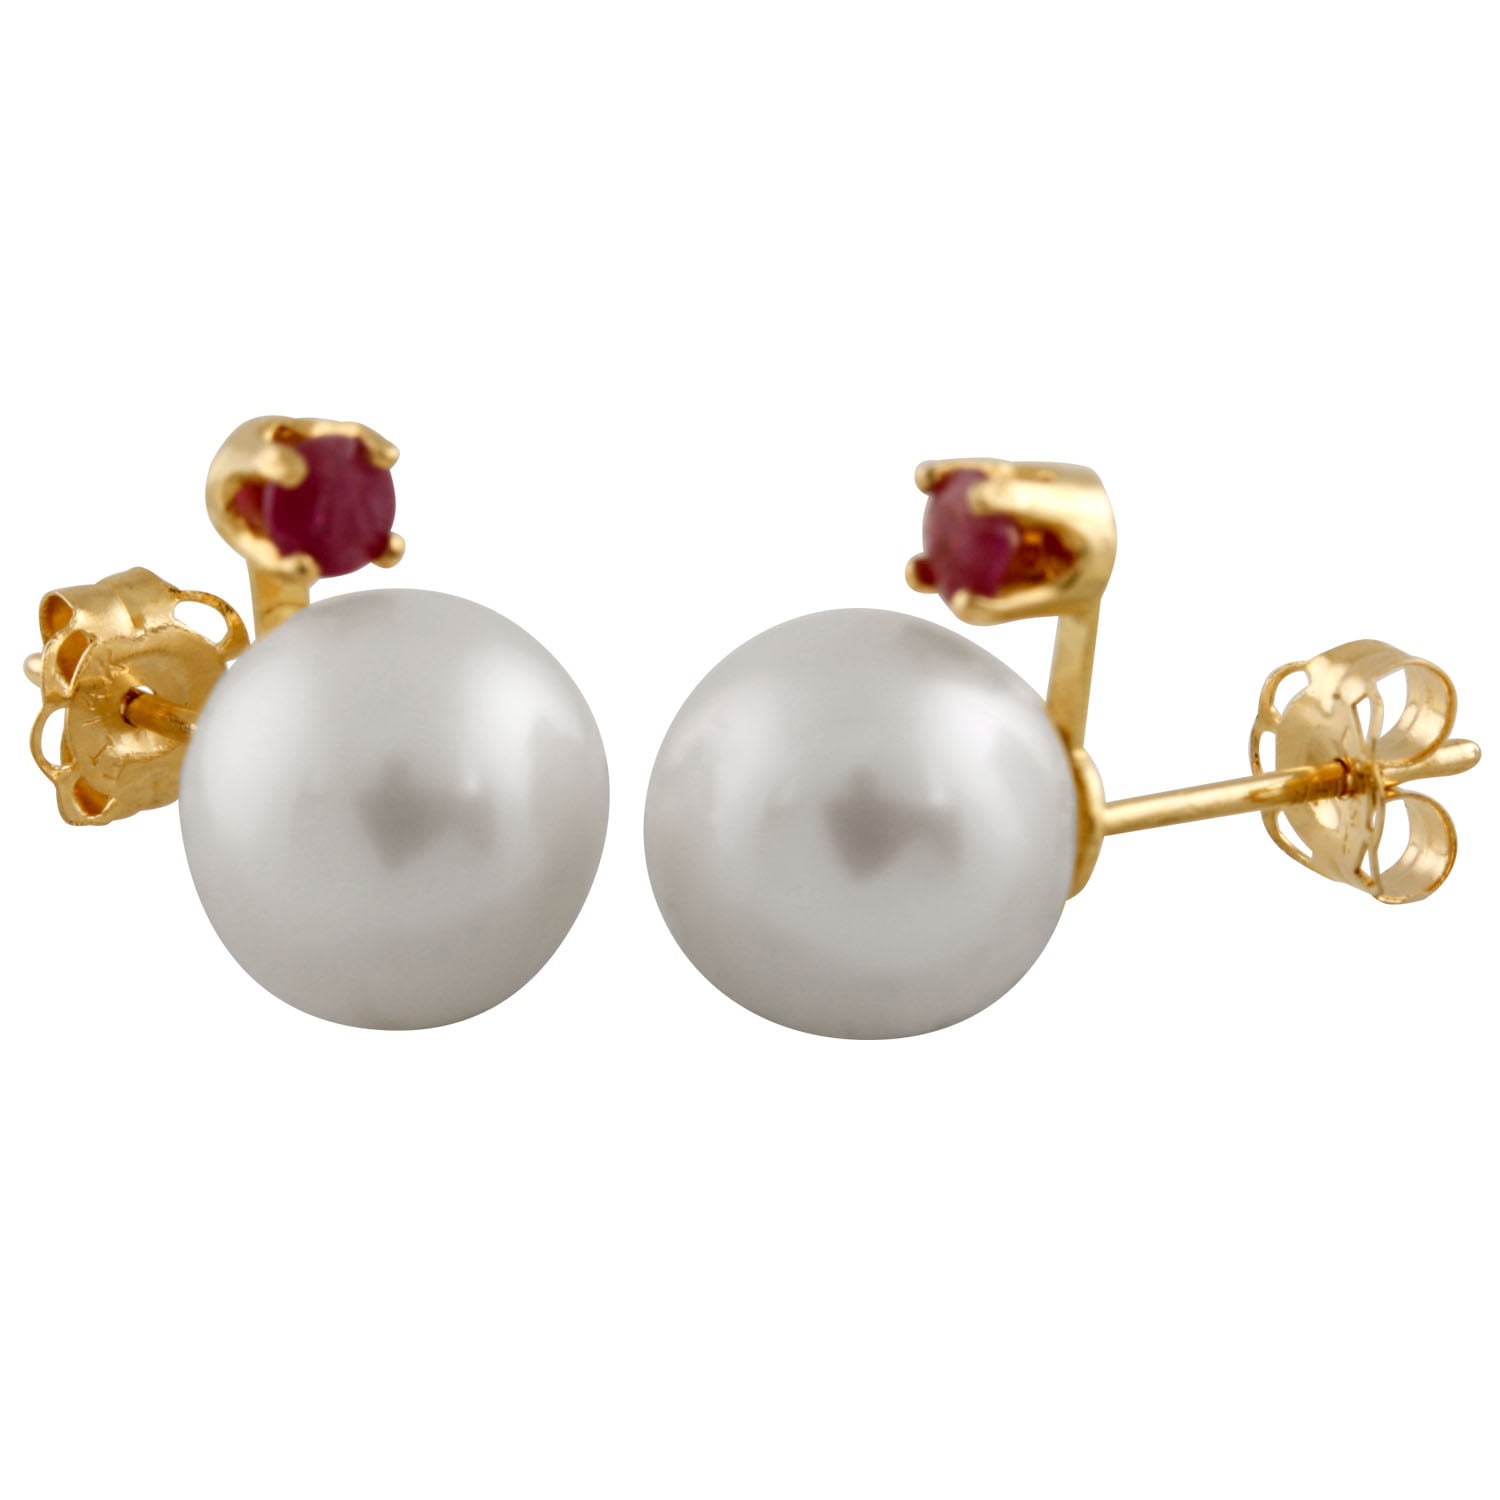 14K Yellow Gold 6mm AAA Quality Freshwater Cultured Pearl Stud Earrings 